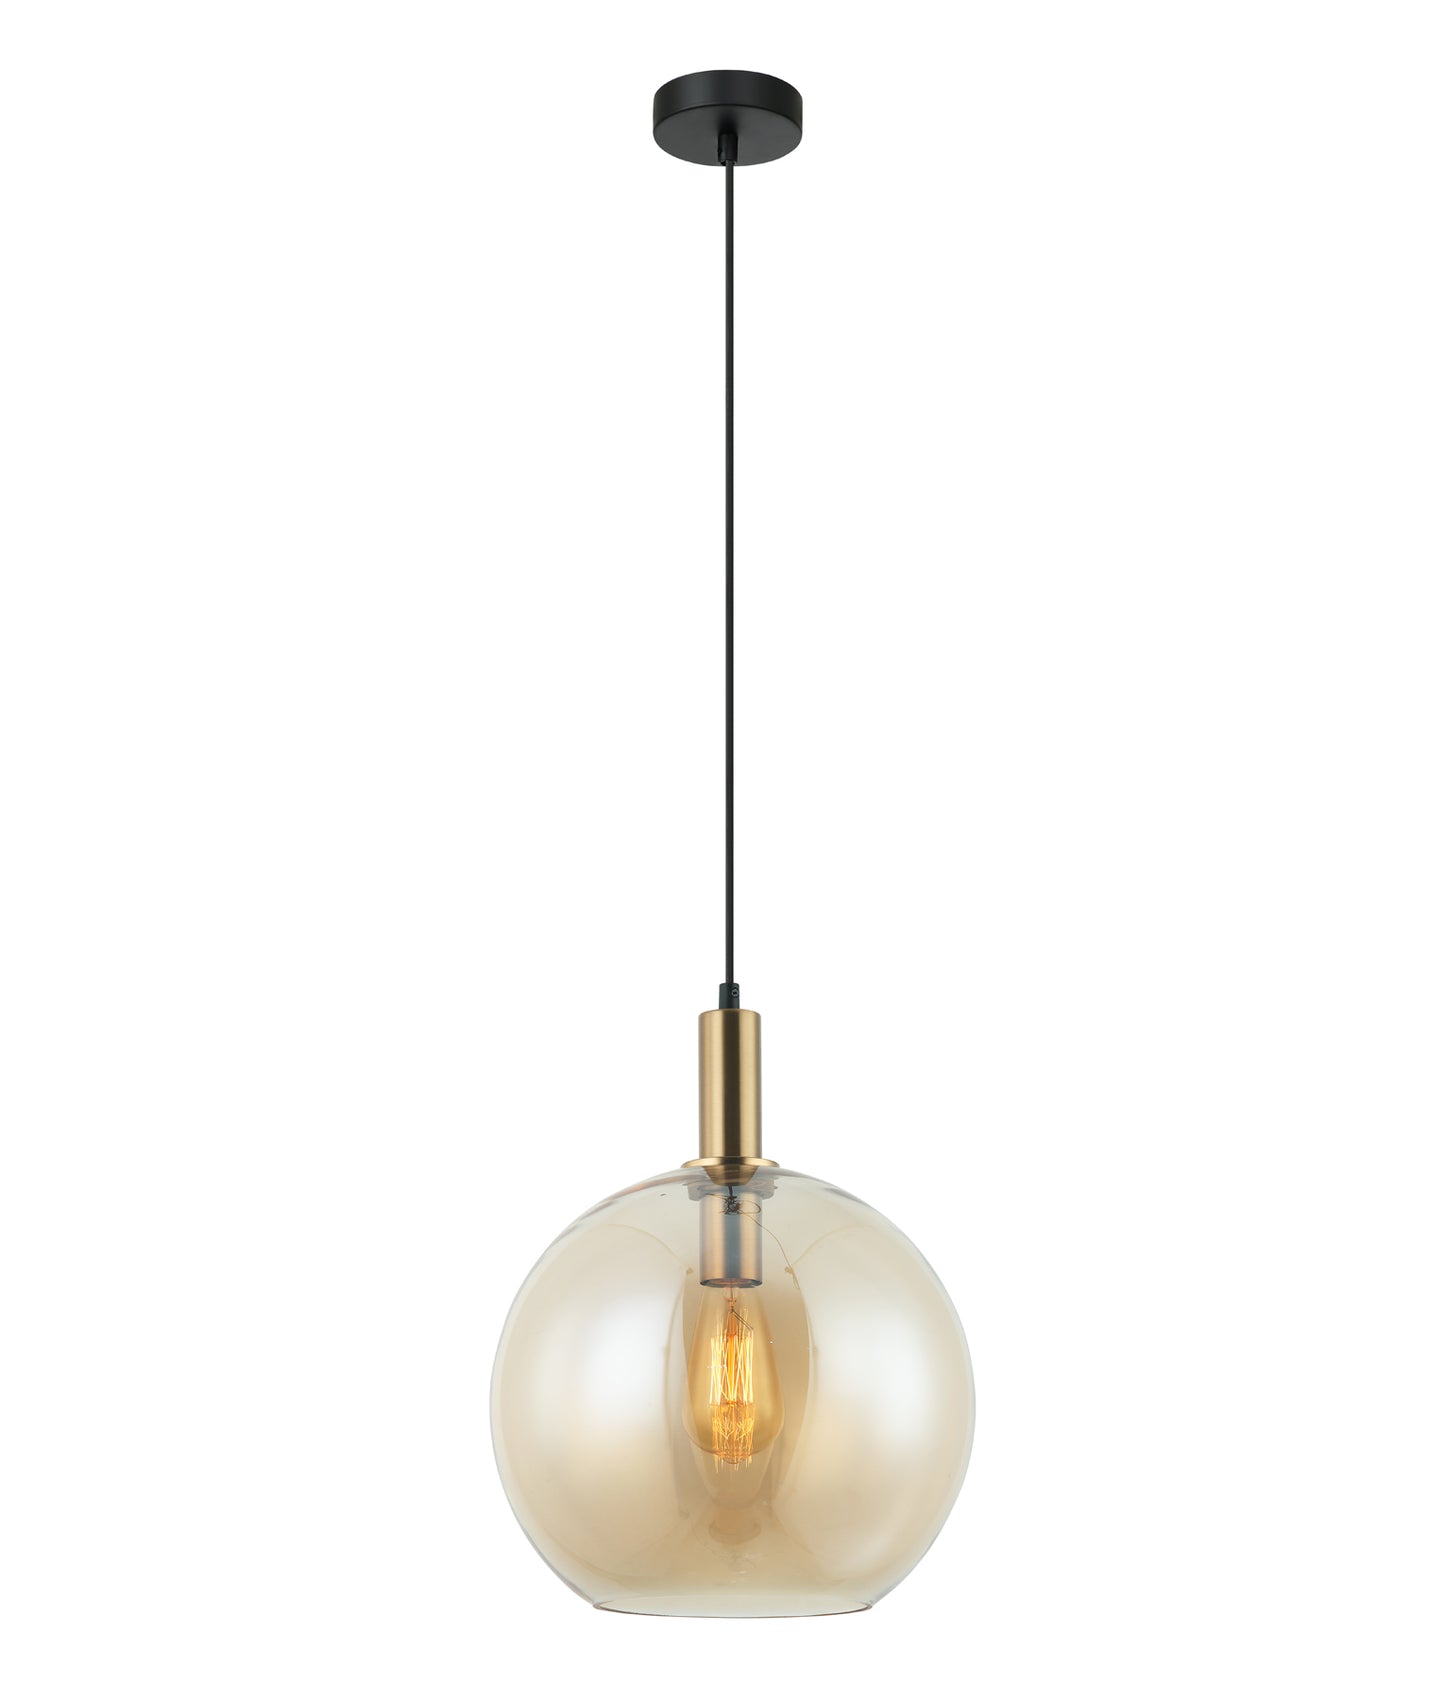 Patera Interior Glass With Extended Pendant Lights